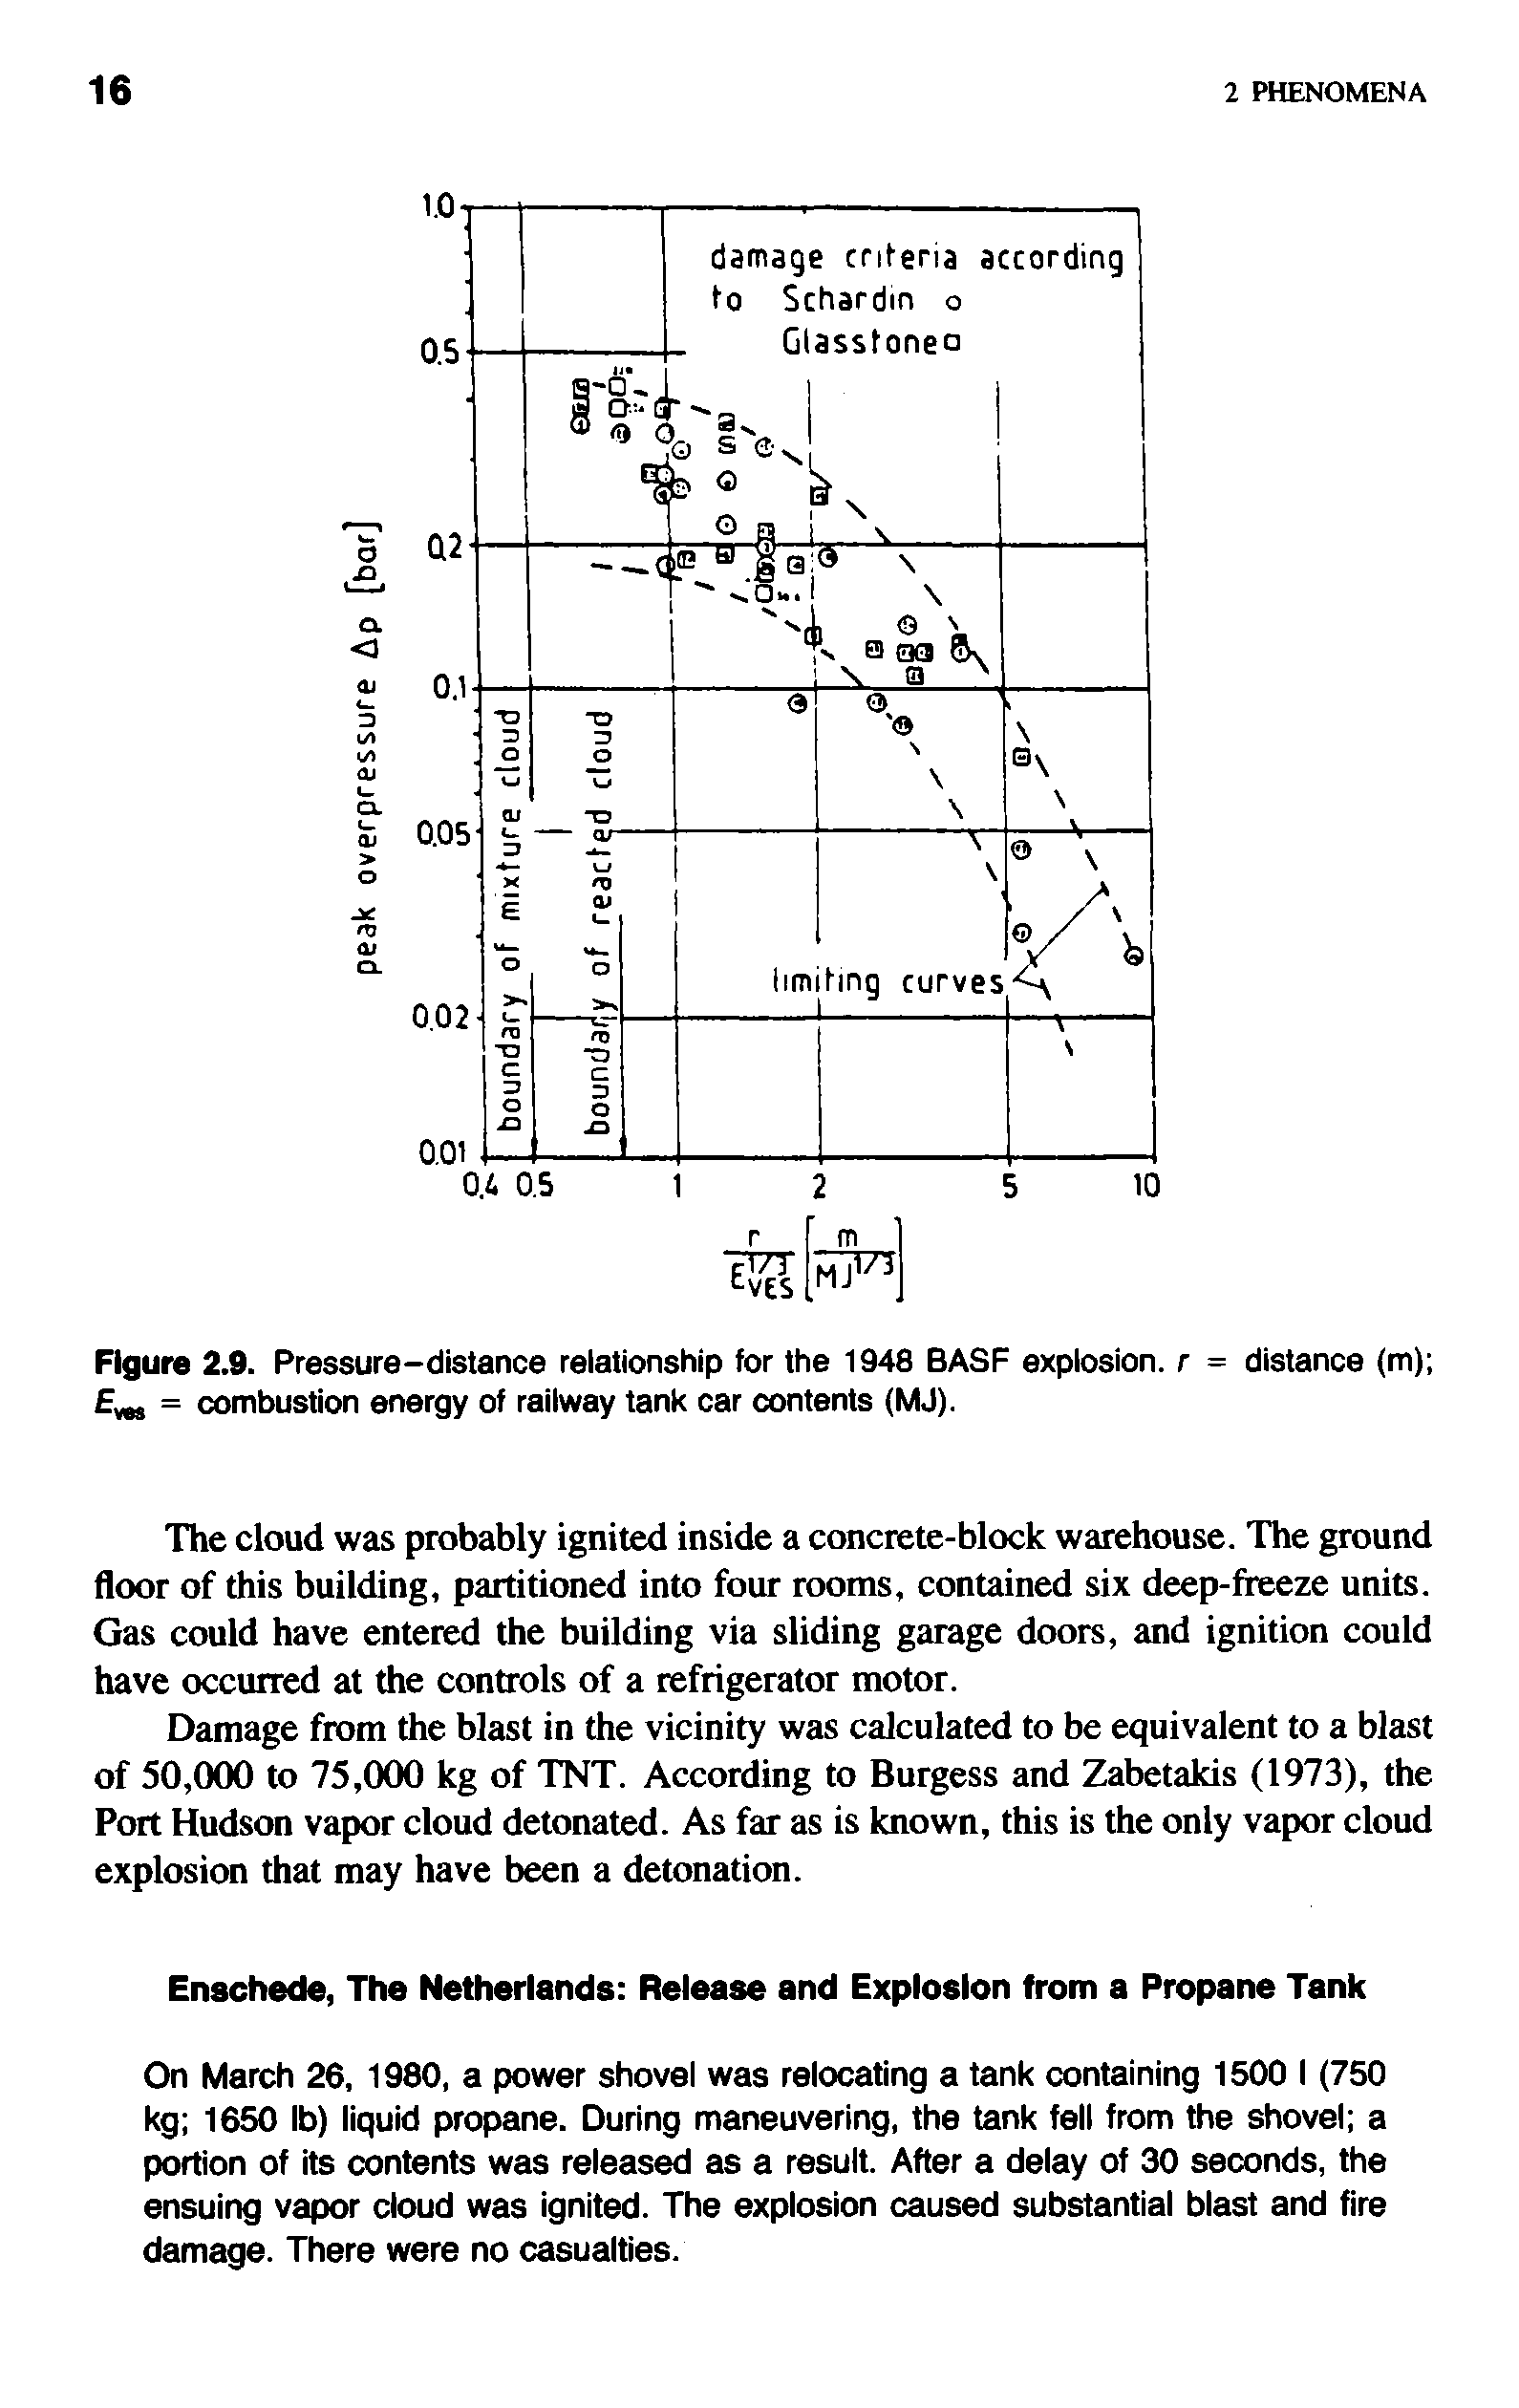 Figure 2.9. Pressure-distance relationship for the 1948 BASF explosion, r = distance (m) ms = combustion energy of railway tank car contents (MJ).